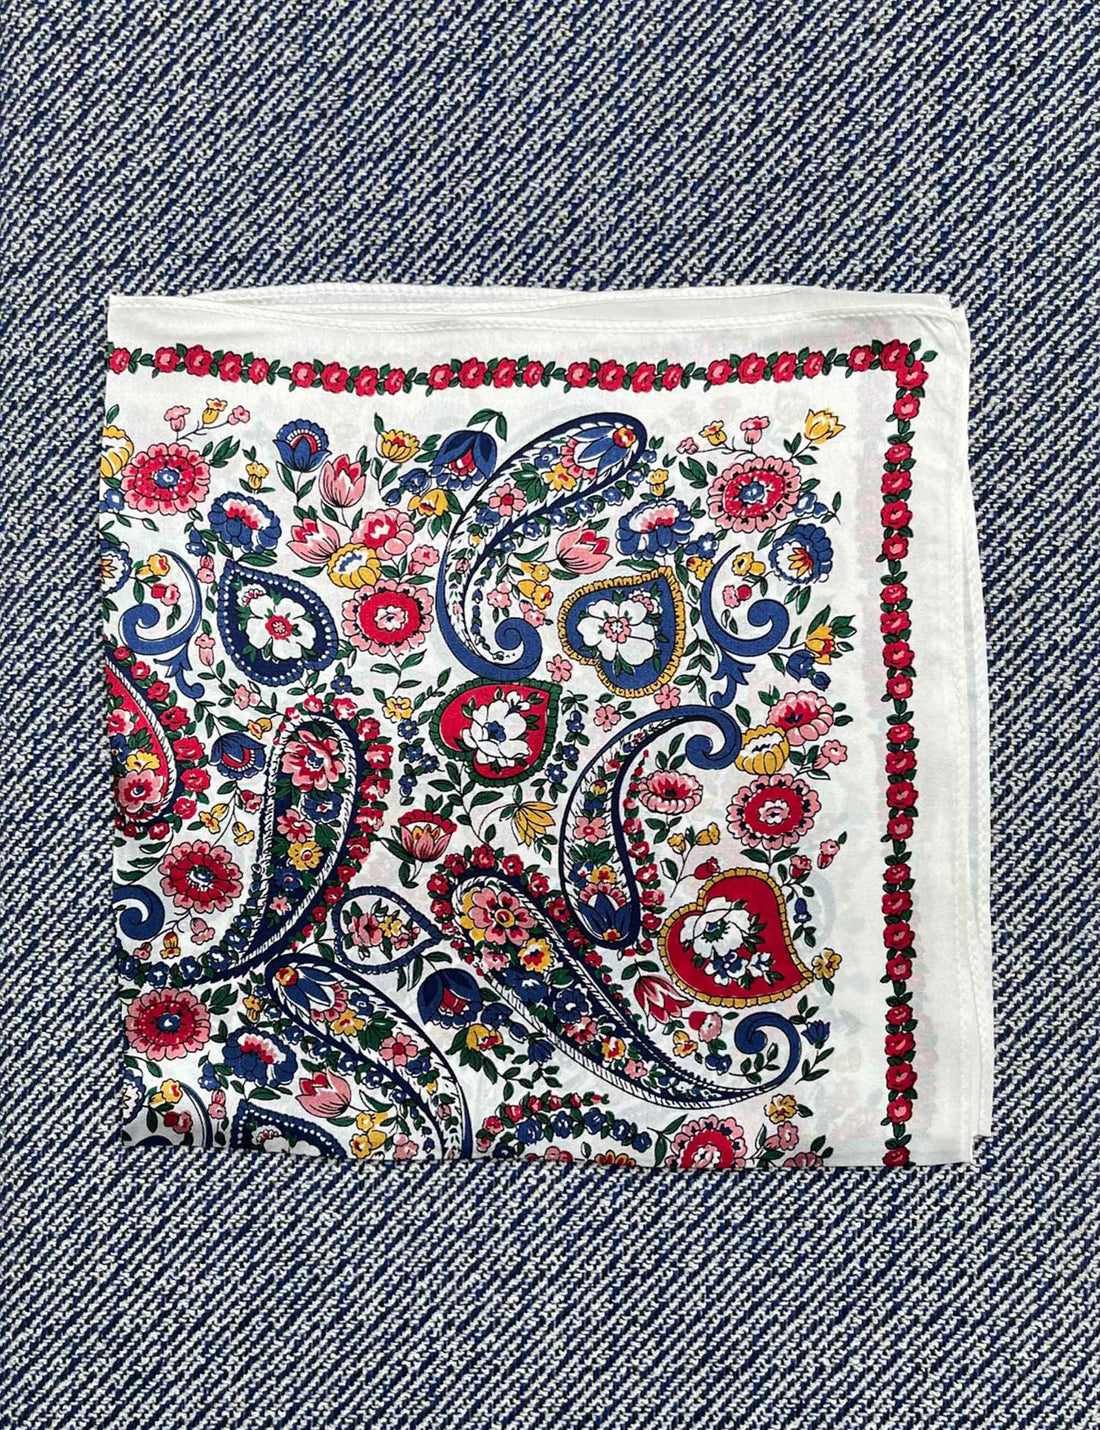 Silk scarf off white/blue/pink paisley